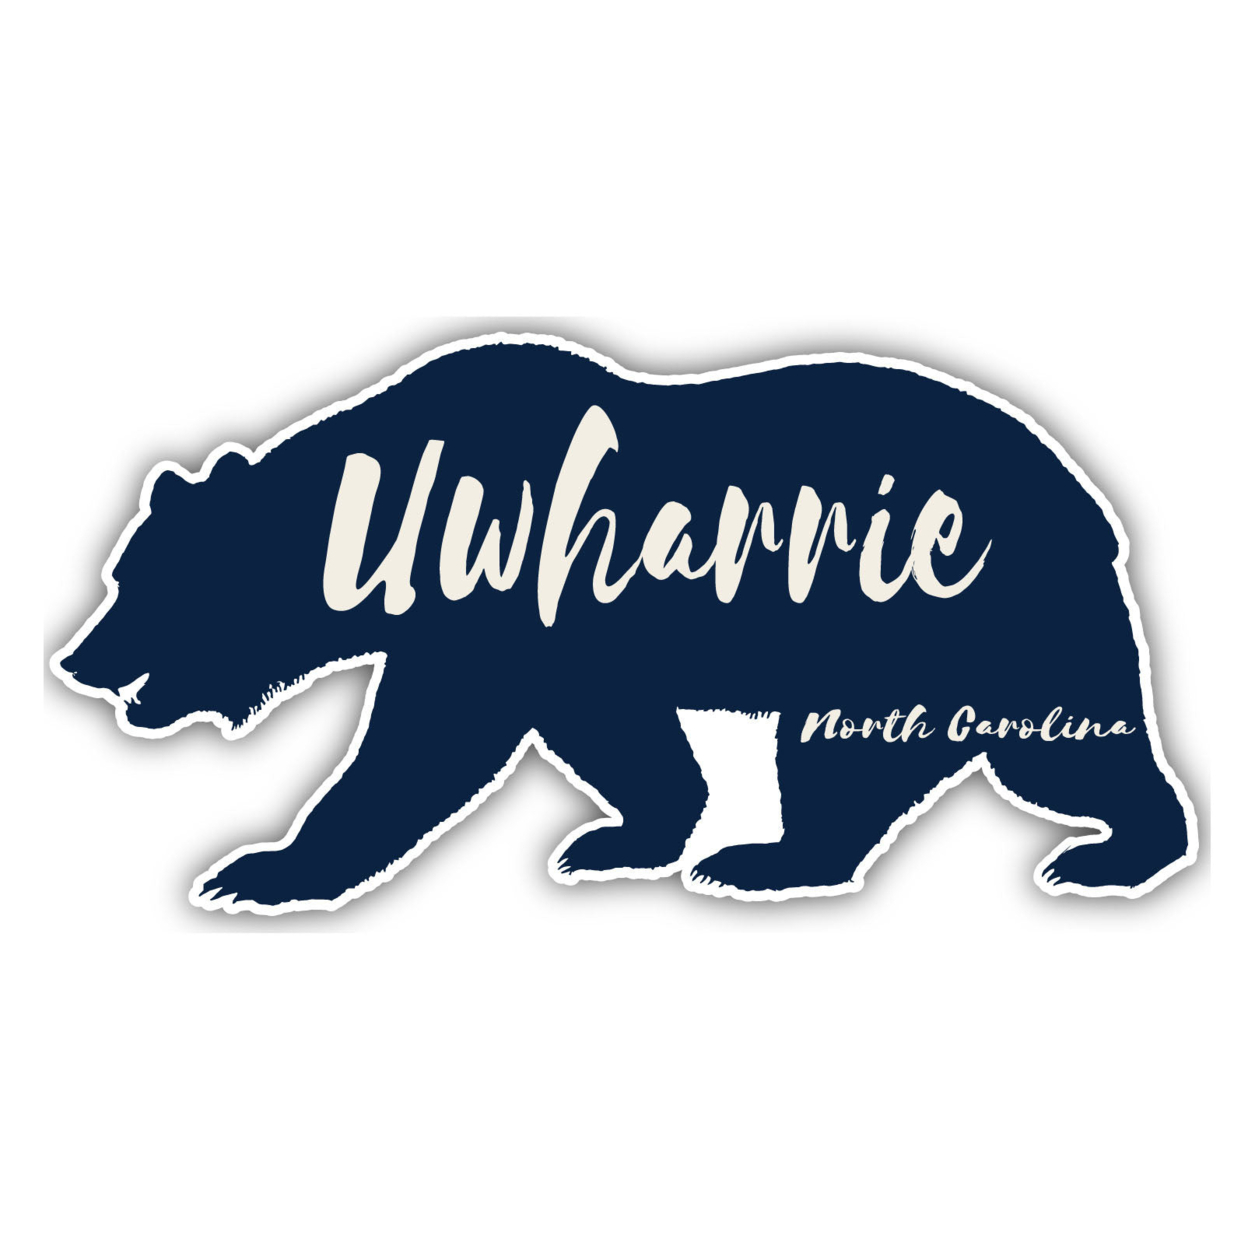 Uwharrie North Carolina Souvenir Decorative Stickers (Choose Theme And Size) - Single Unit, 4-Inch, Great Outdoors